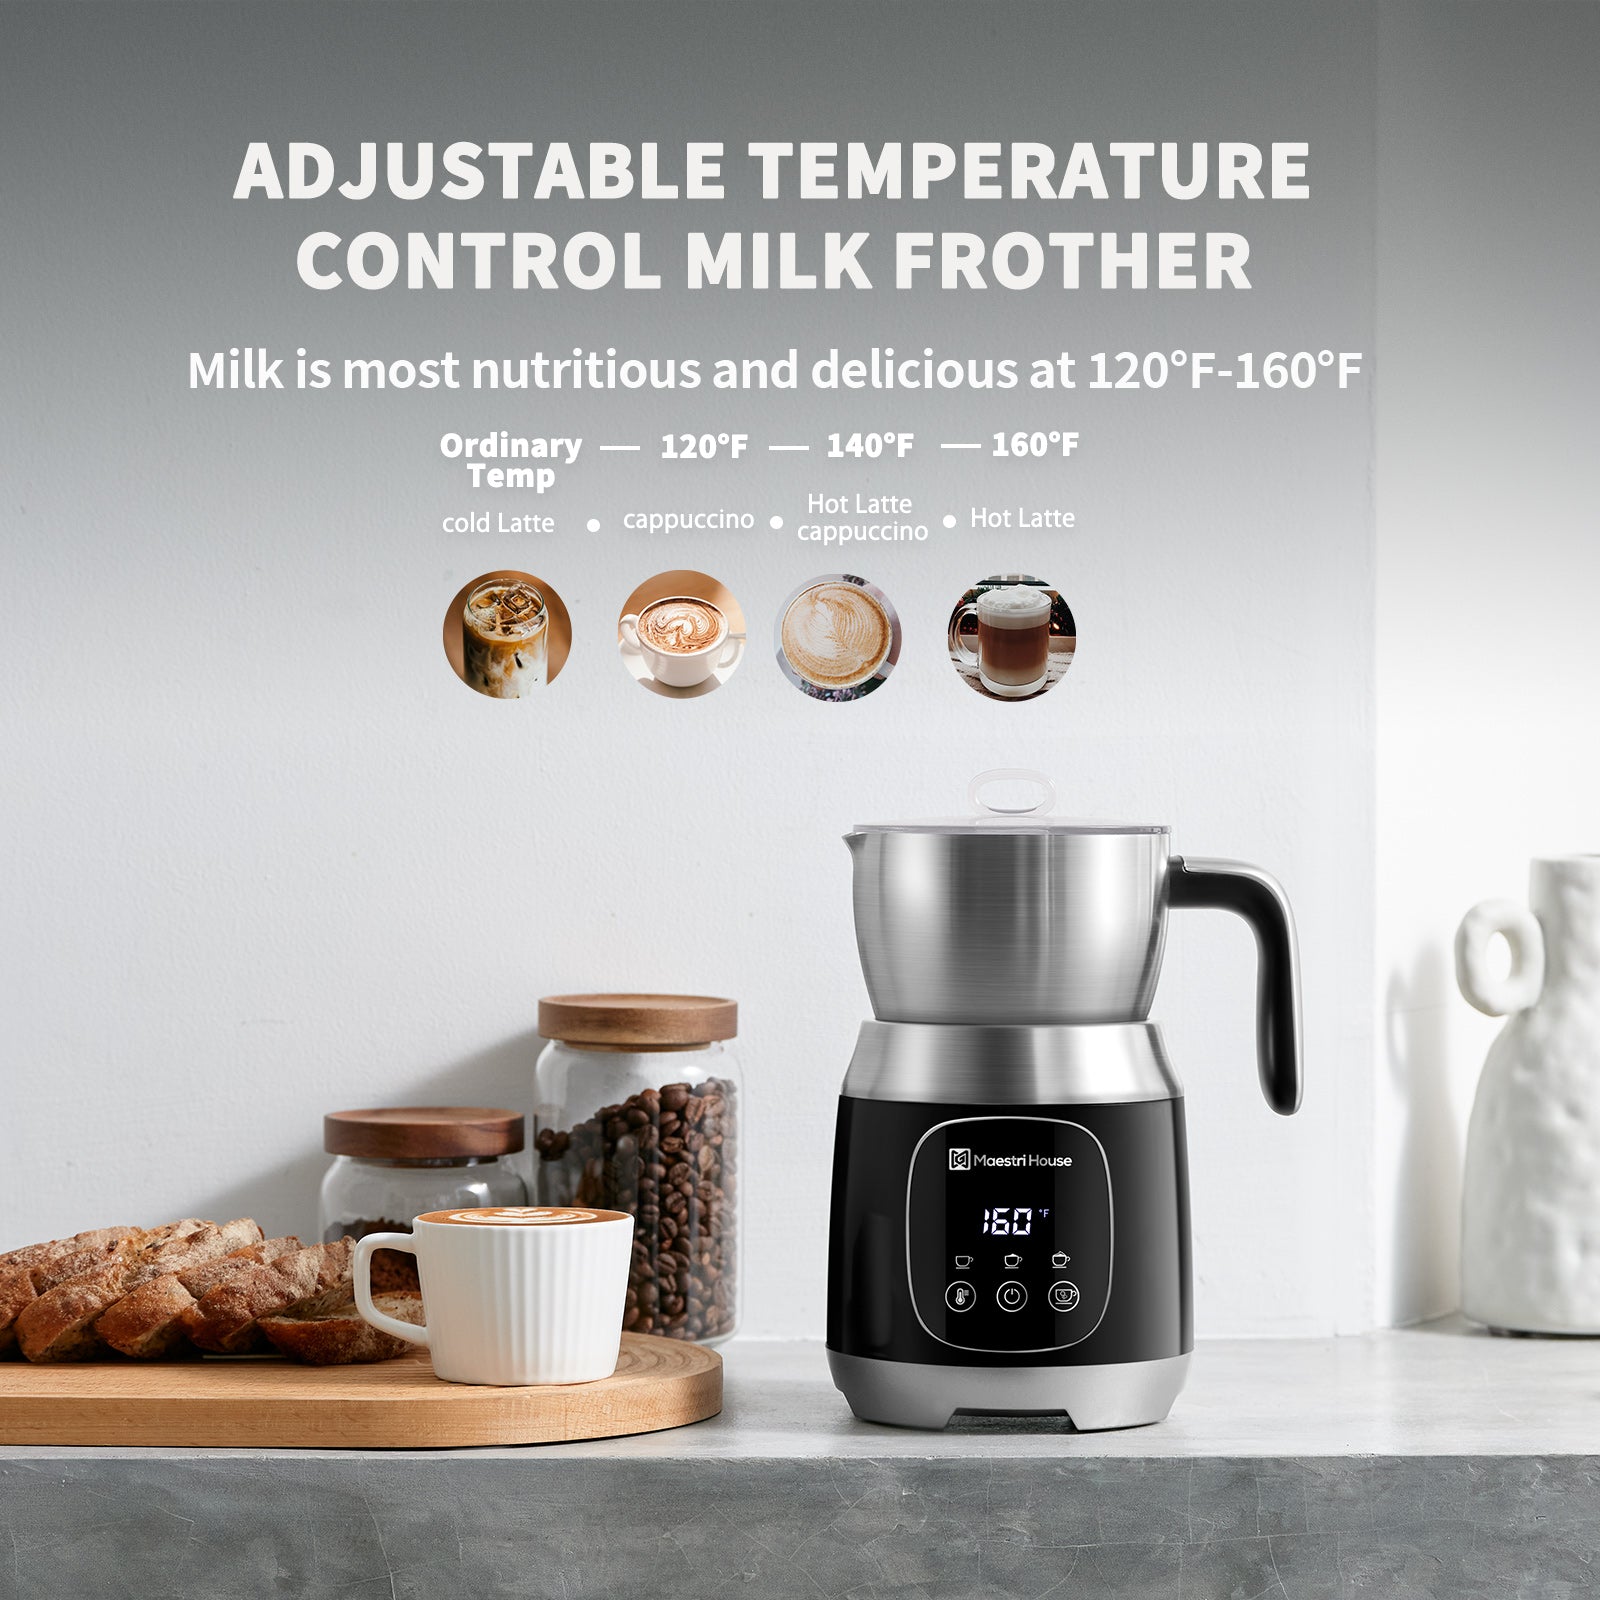 Maestri House Detachable Milk Frother with Smart Touch Control,Variable  Temp and Froth Thickness - Moonlight White 